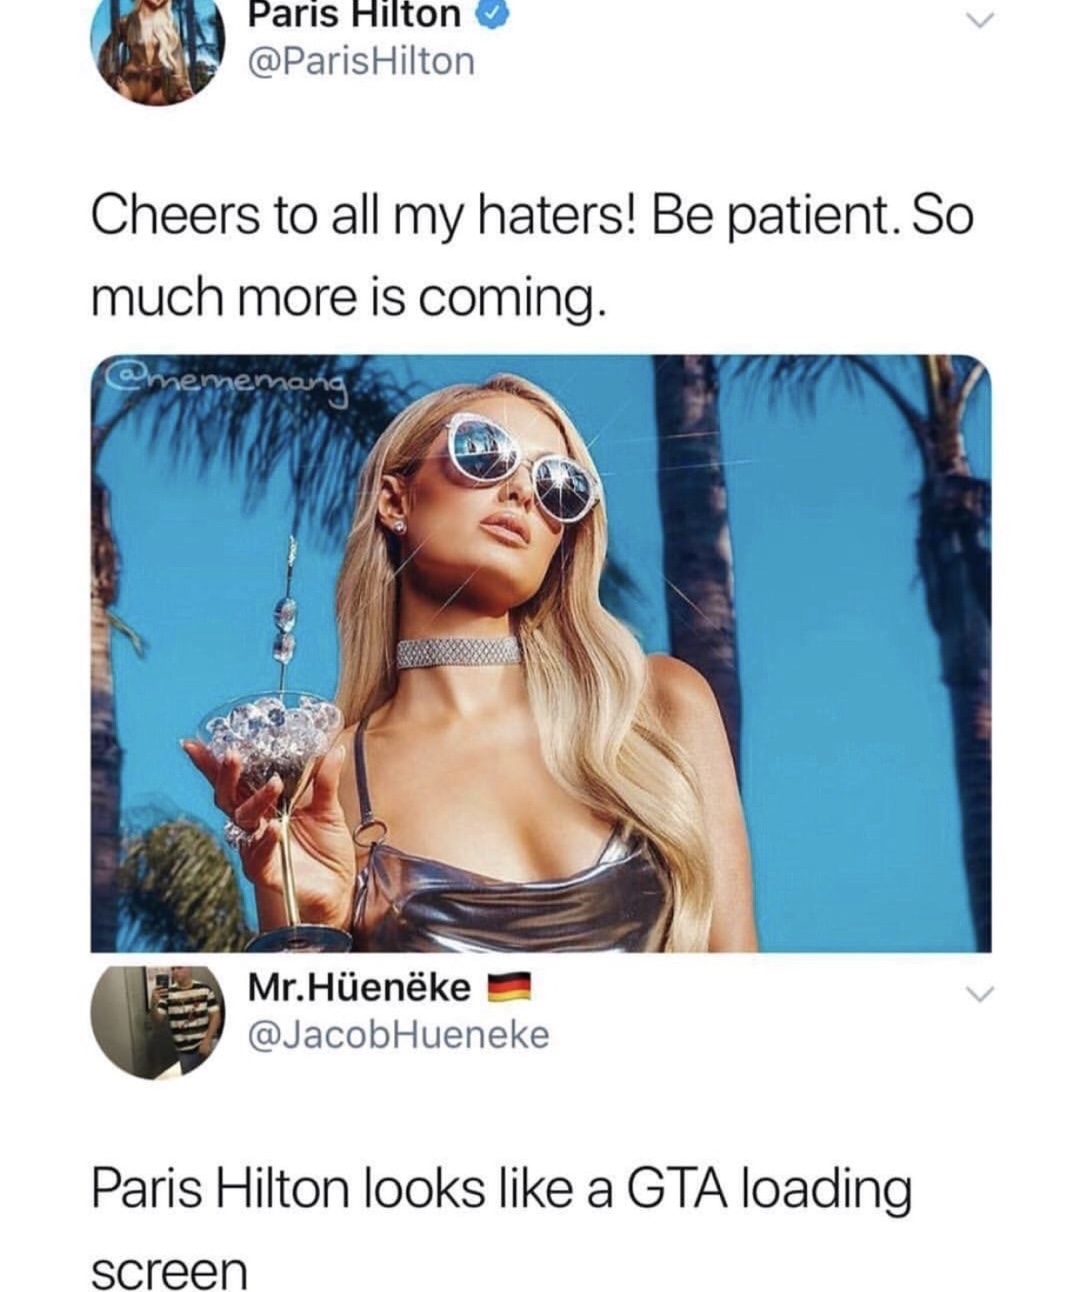 Dank meme pointing out that Paris Hilton looks like a GTA loading screen in this picture